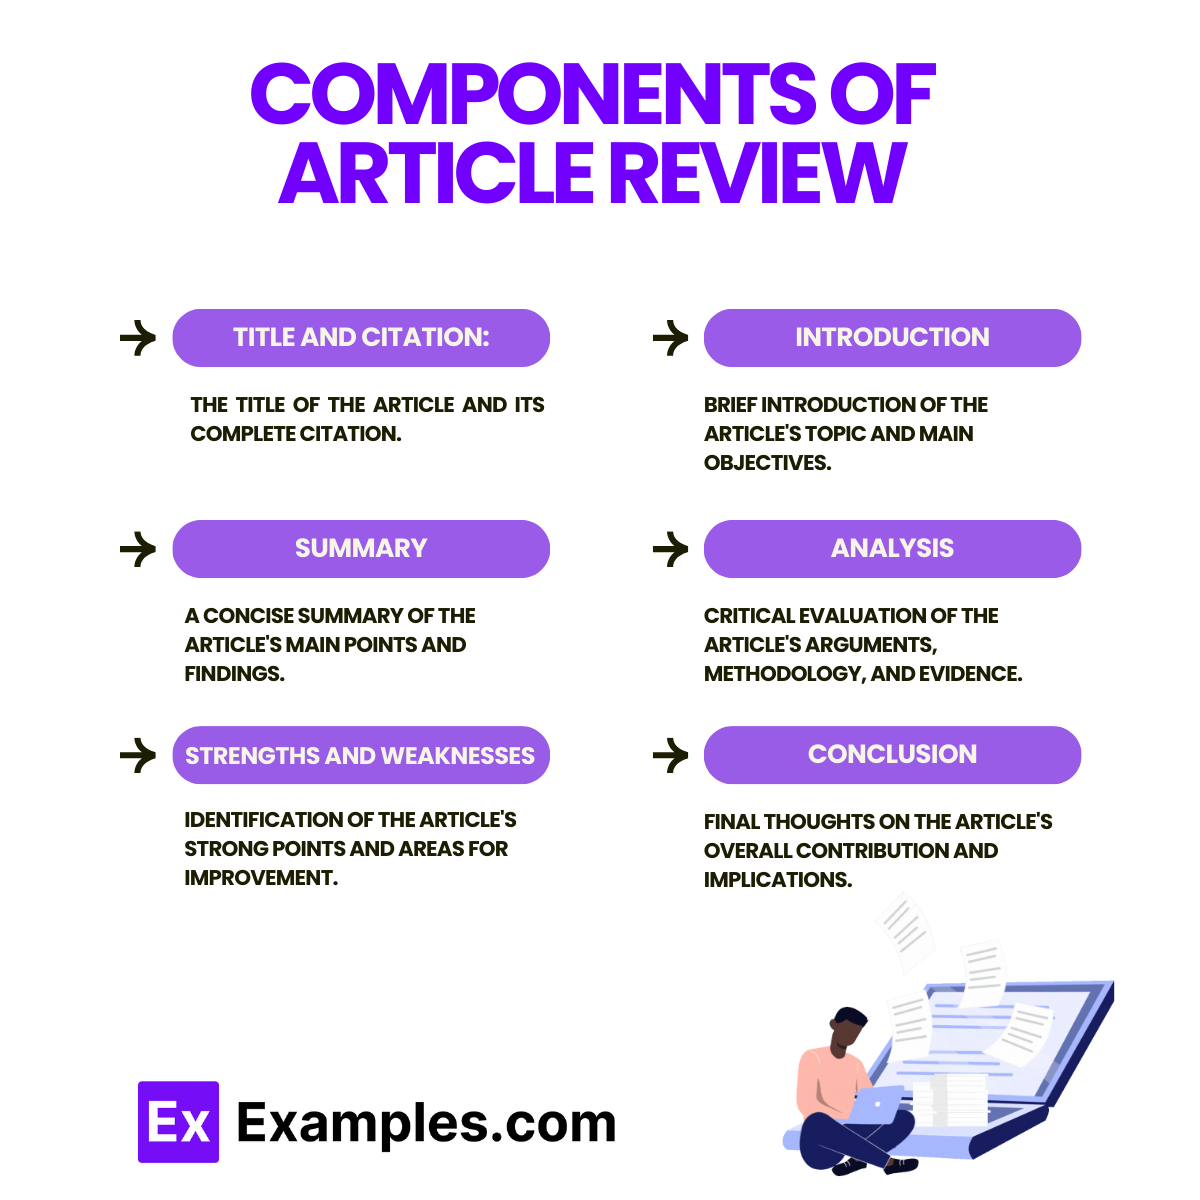 Components of Article Review